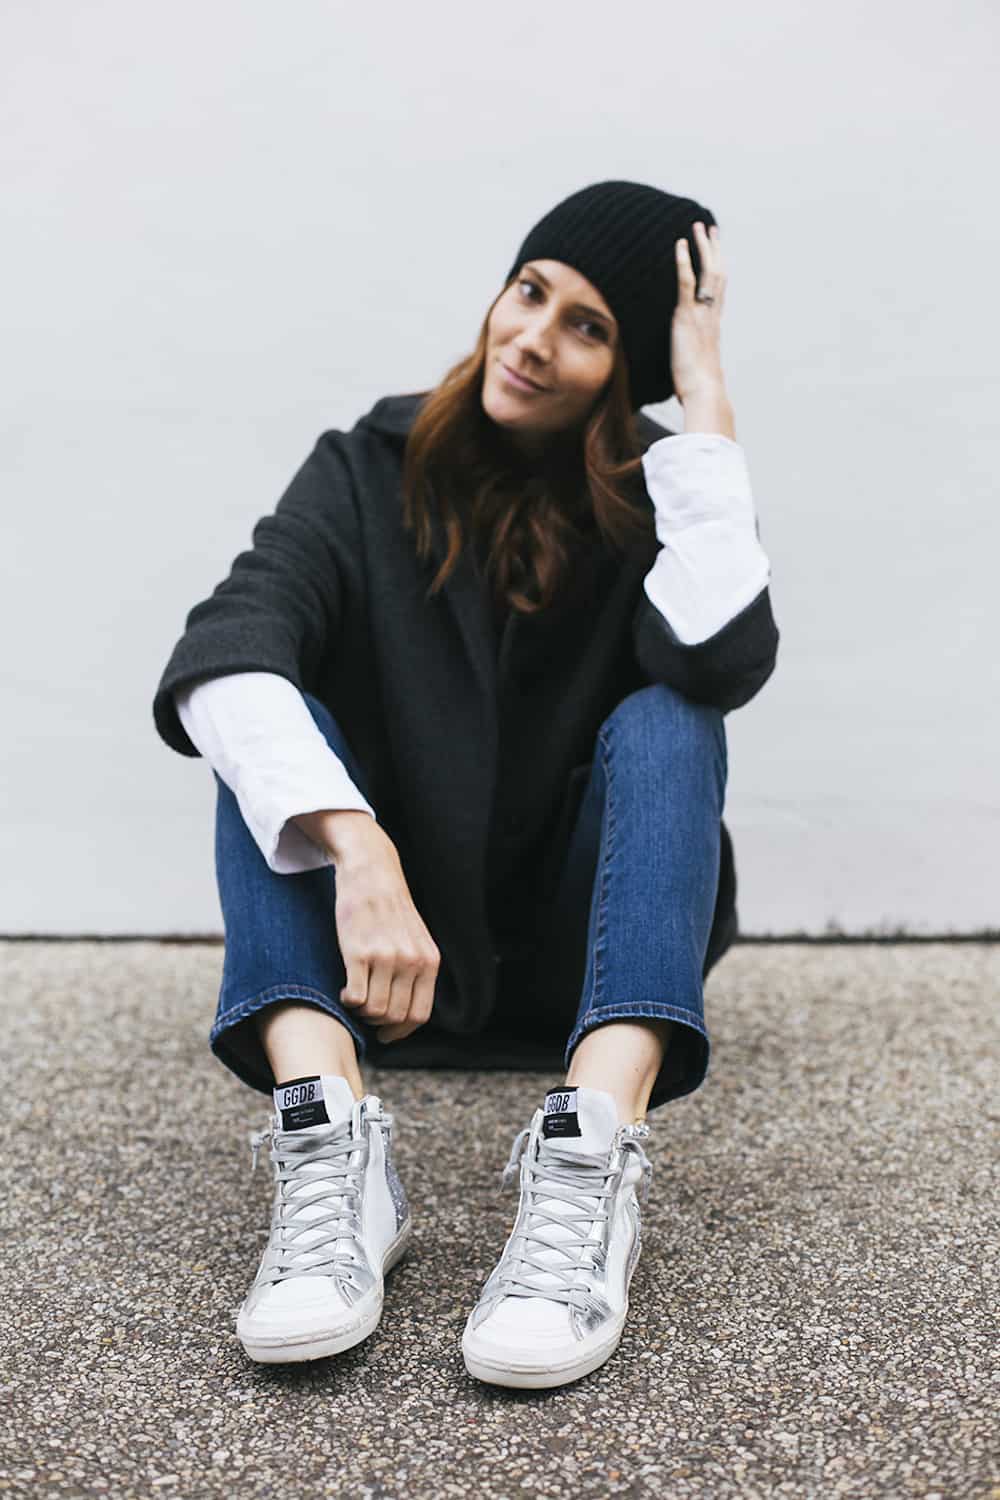 image of a woman wearing a black toque, dark sweater, jeans, and high top sneakers with a star design